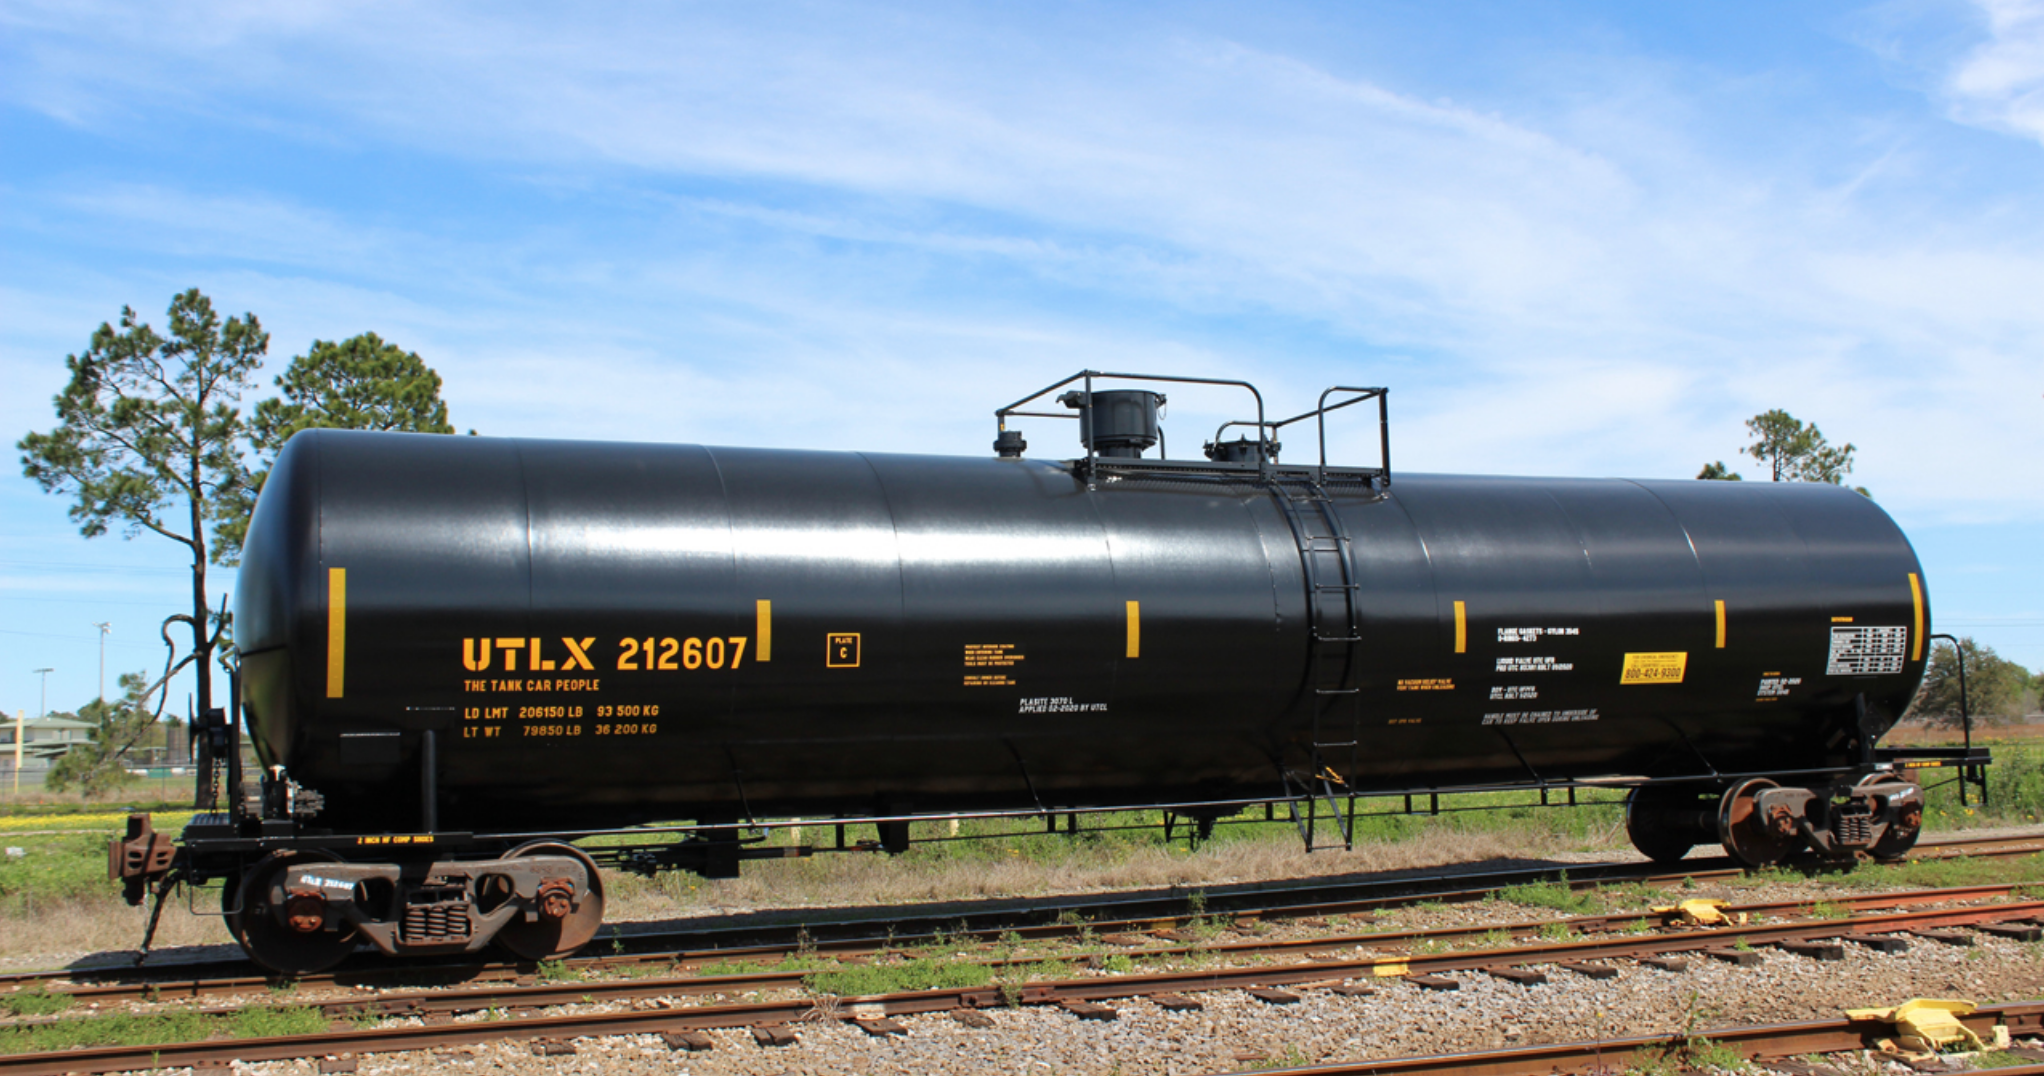 Sheena Prevette is Director of Regulatory and Industry Affairs for the Railway Supply Institute. She continues to serve as Union Tank Car Company’s Director of Scheduling Optimization. (Photograph Courtesy of Union Tank Car Company)